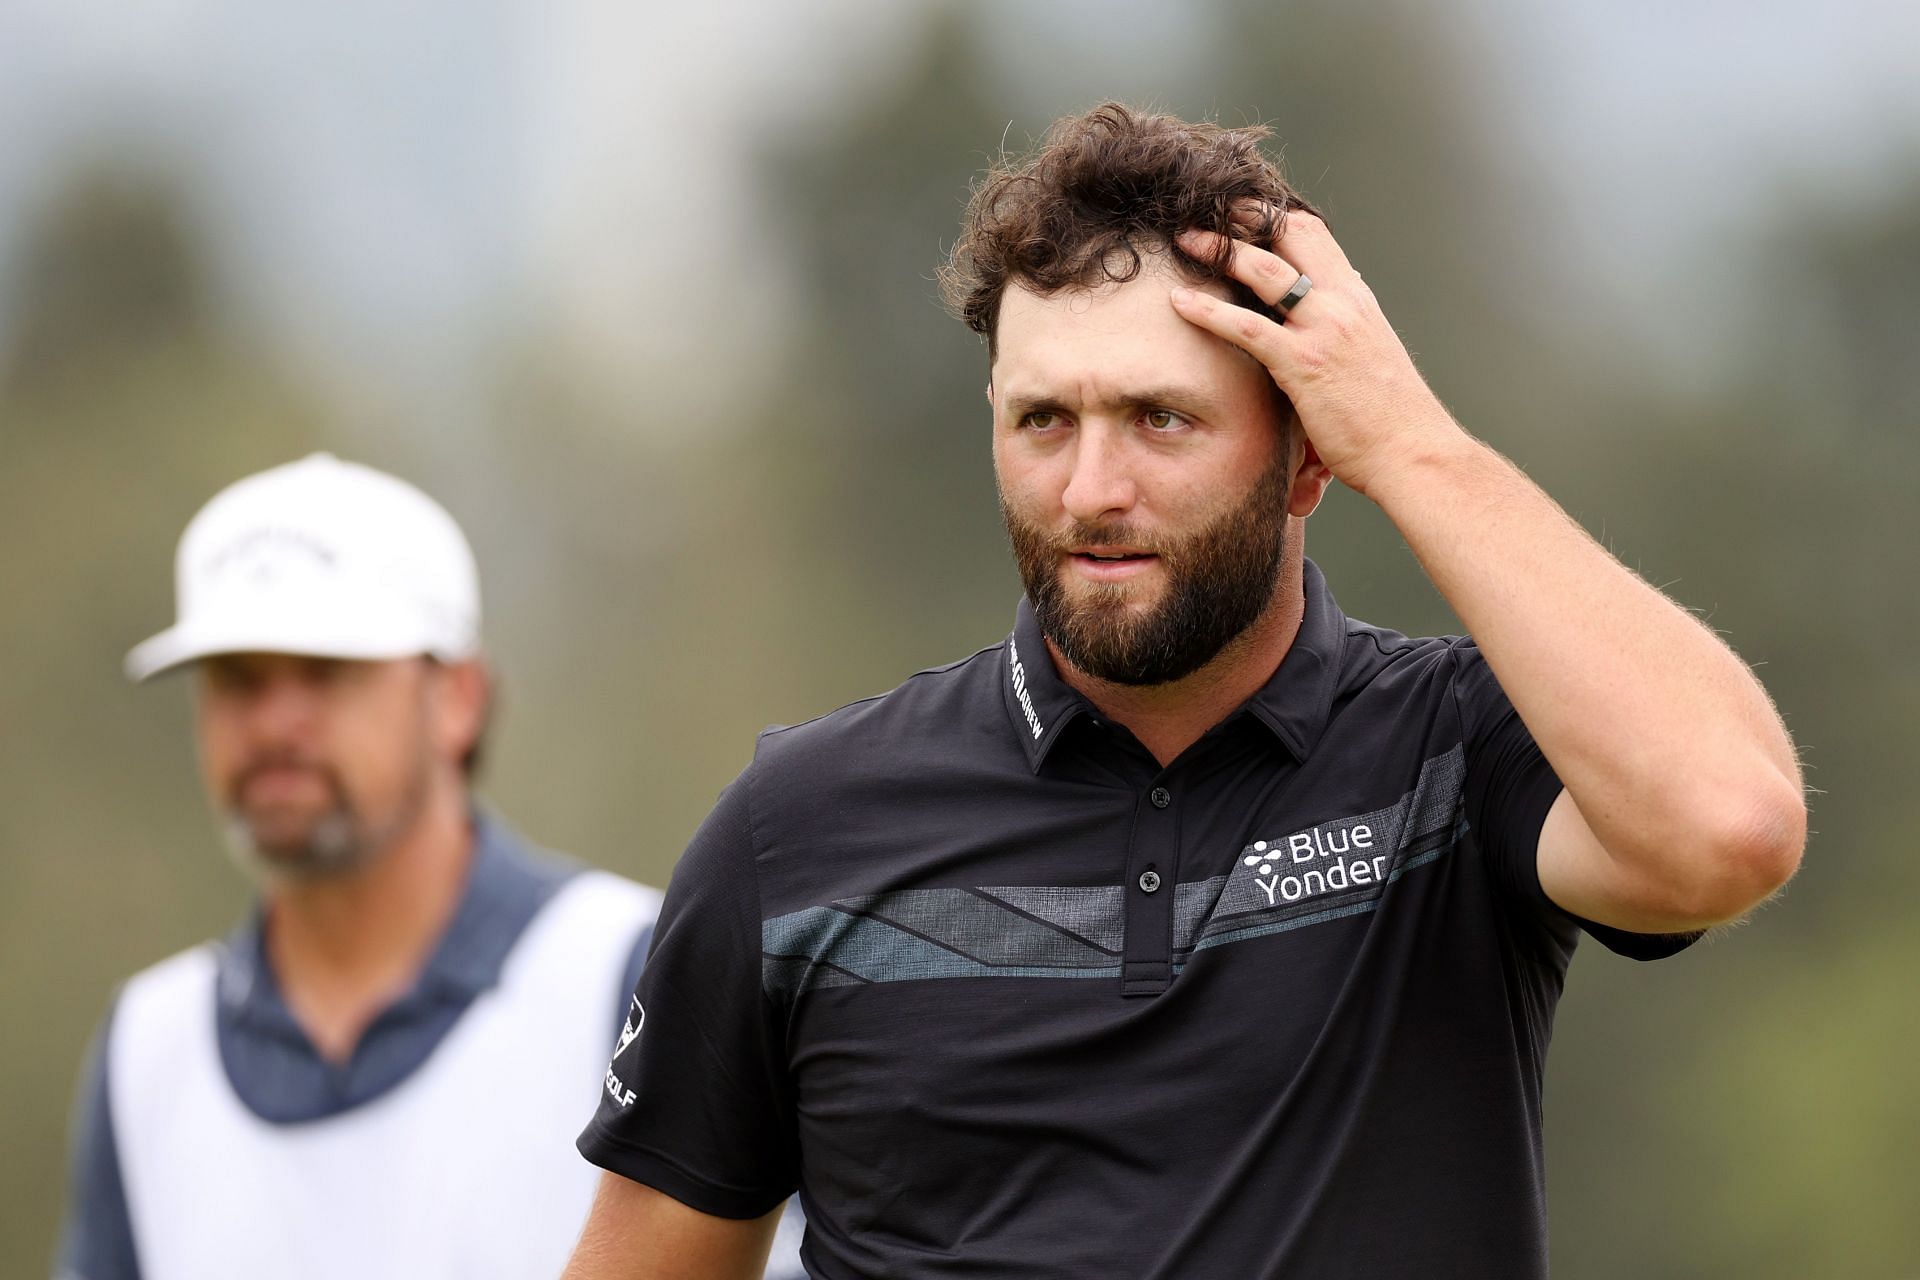 Jon Rahm is not playing so well right now